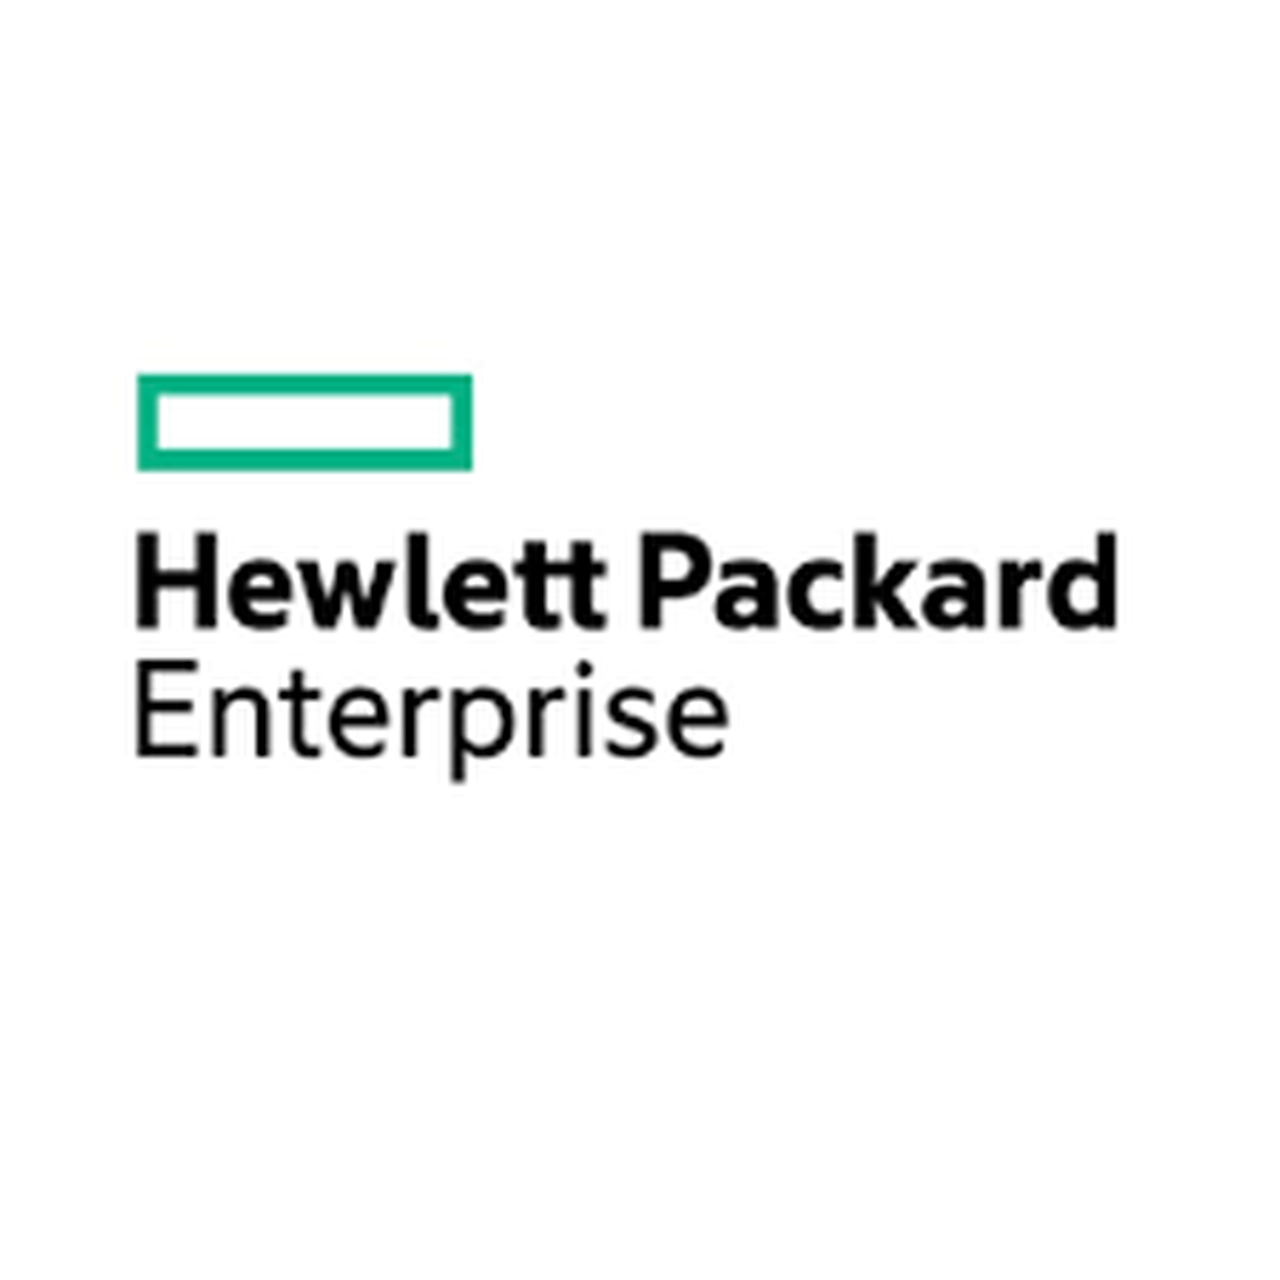 HPE 2 Years Post Warranty Foundation Care, Next Business Day wDMR BL460c Gen9 Service